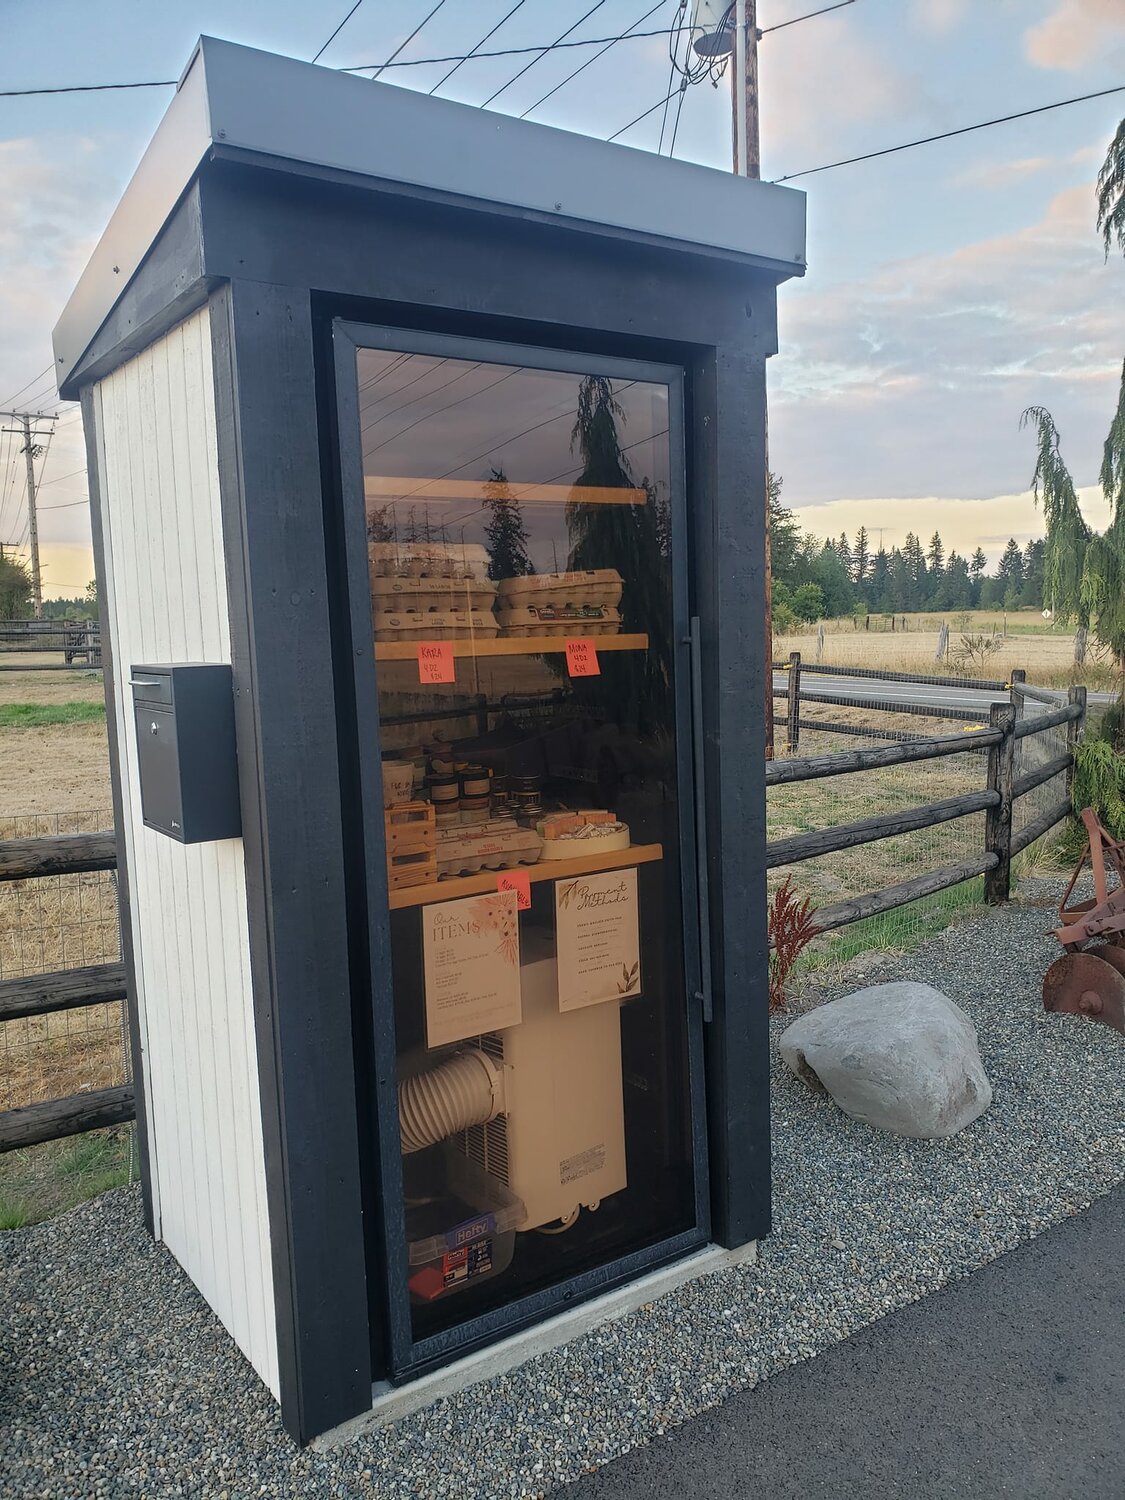 The Green Branch Ranch Pantry is a convenient way for people to pick up goods from the locally owned Green Branch Ranch near Yelm.